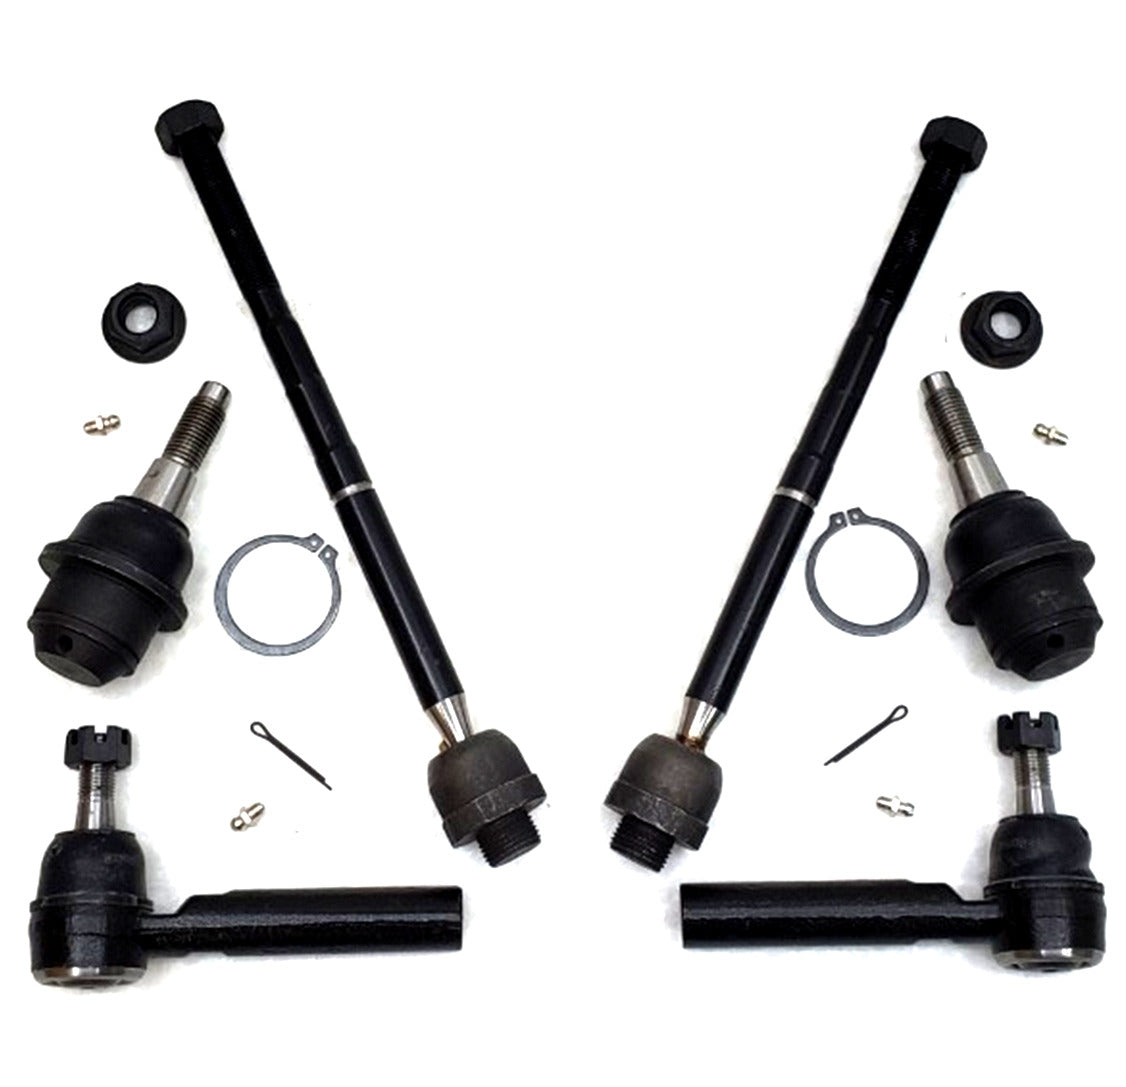 HD Ball Joints Tie Rod Ends Steering Kit for 2007-2013 Chevrolet, GMC, Cadillac 4x4, 2WD